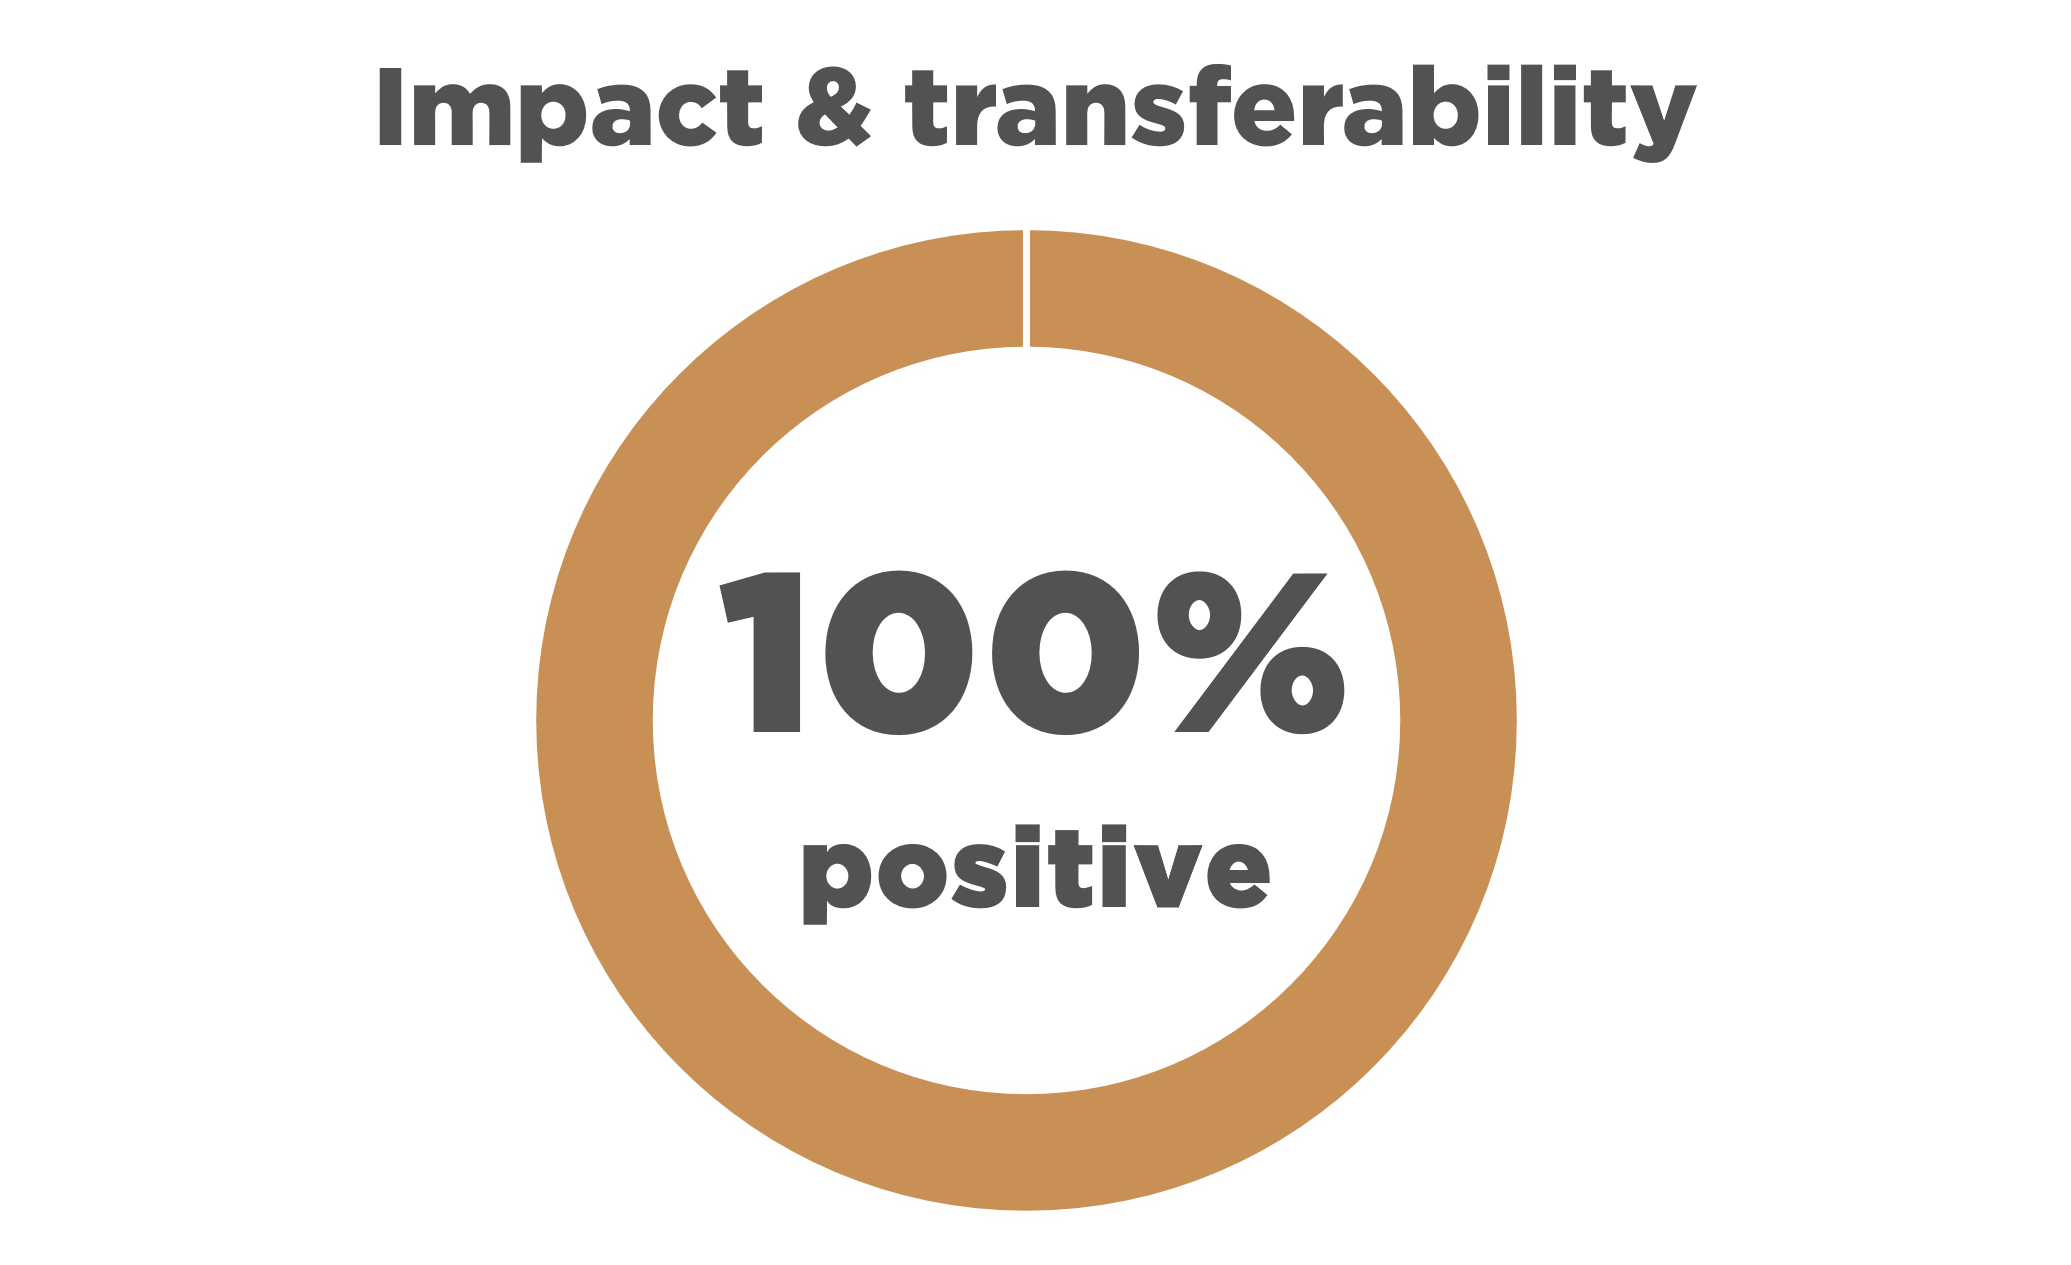 Text reads: "Impact & transferability 100% positive" with a pie chart representing the statement